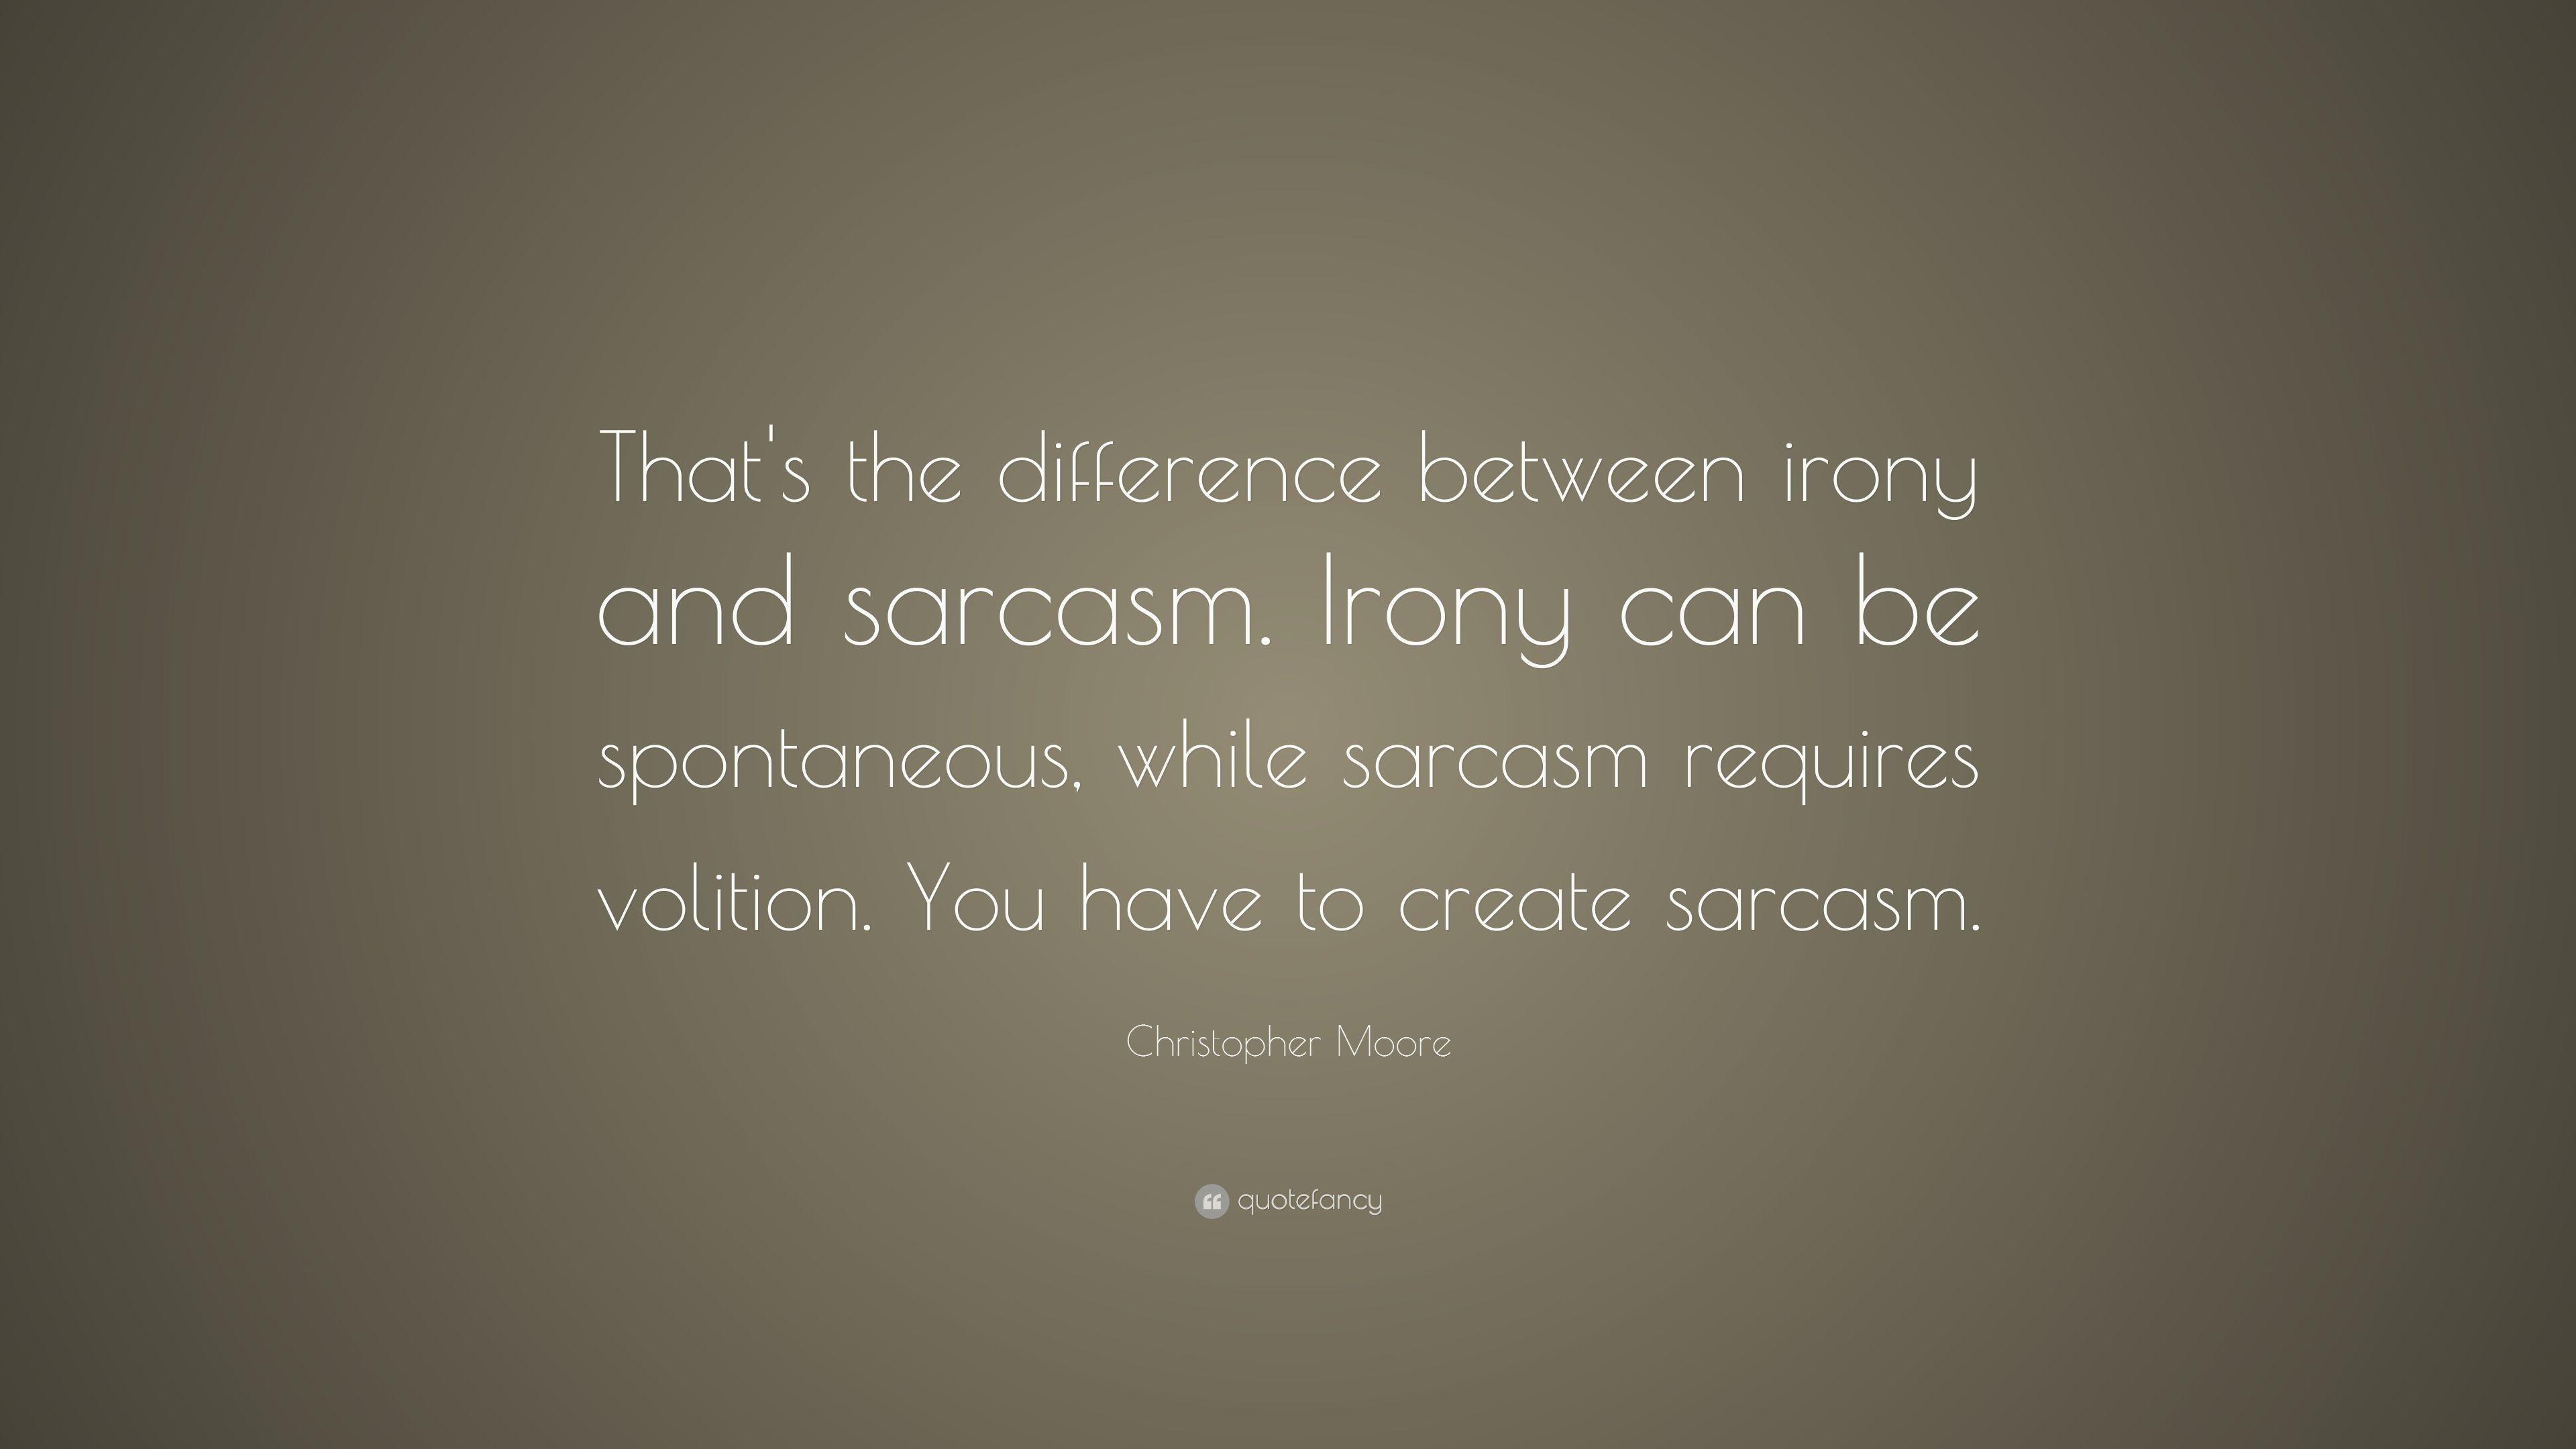 Christopher Moore Quote: “That's the difference between irony